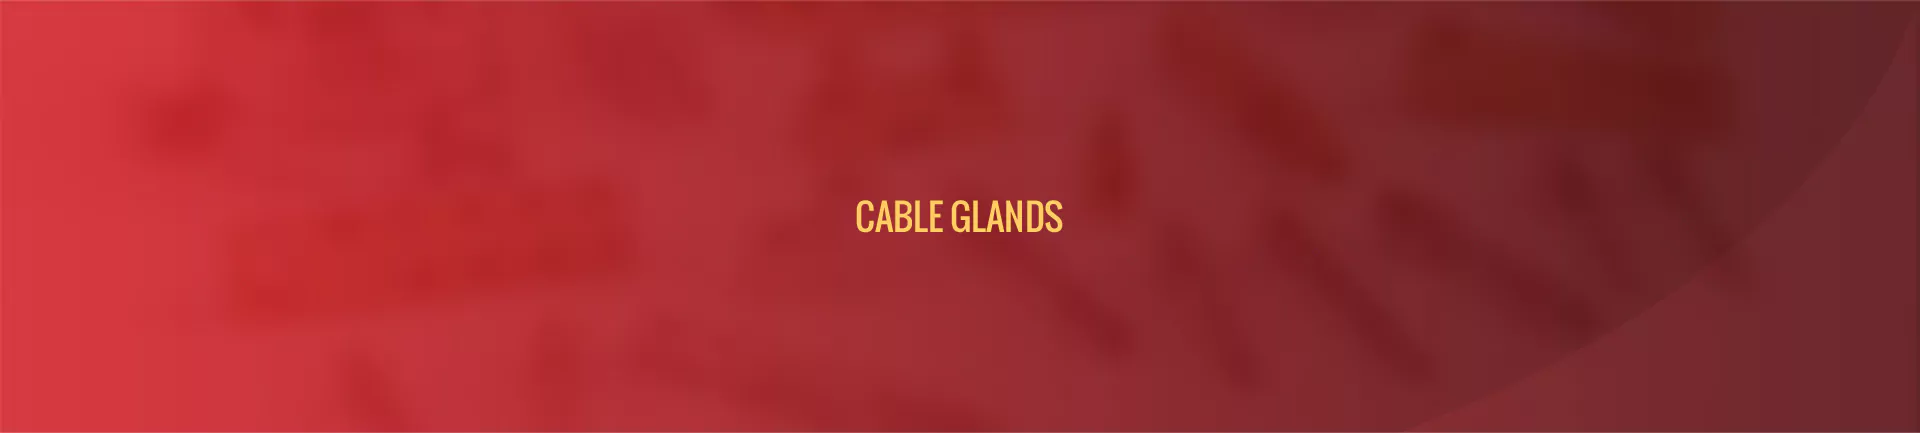 cable-glands-banner